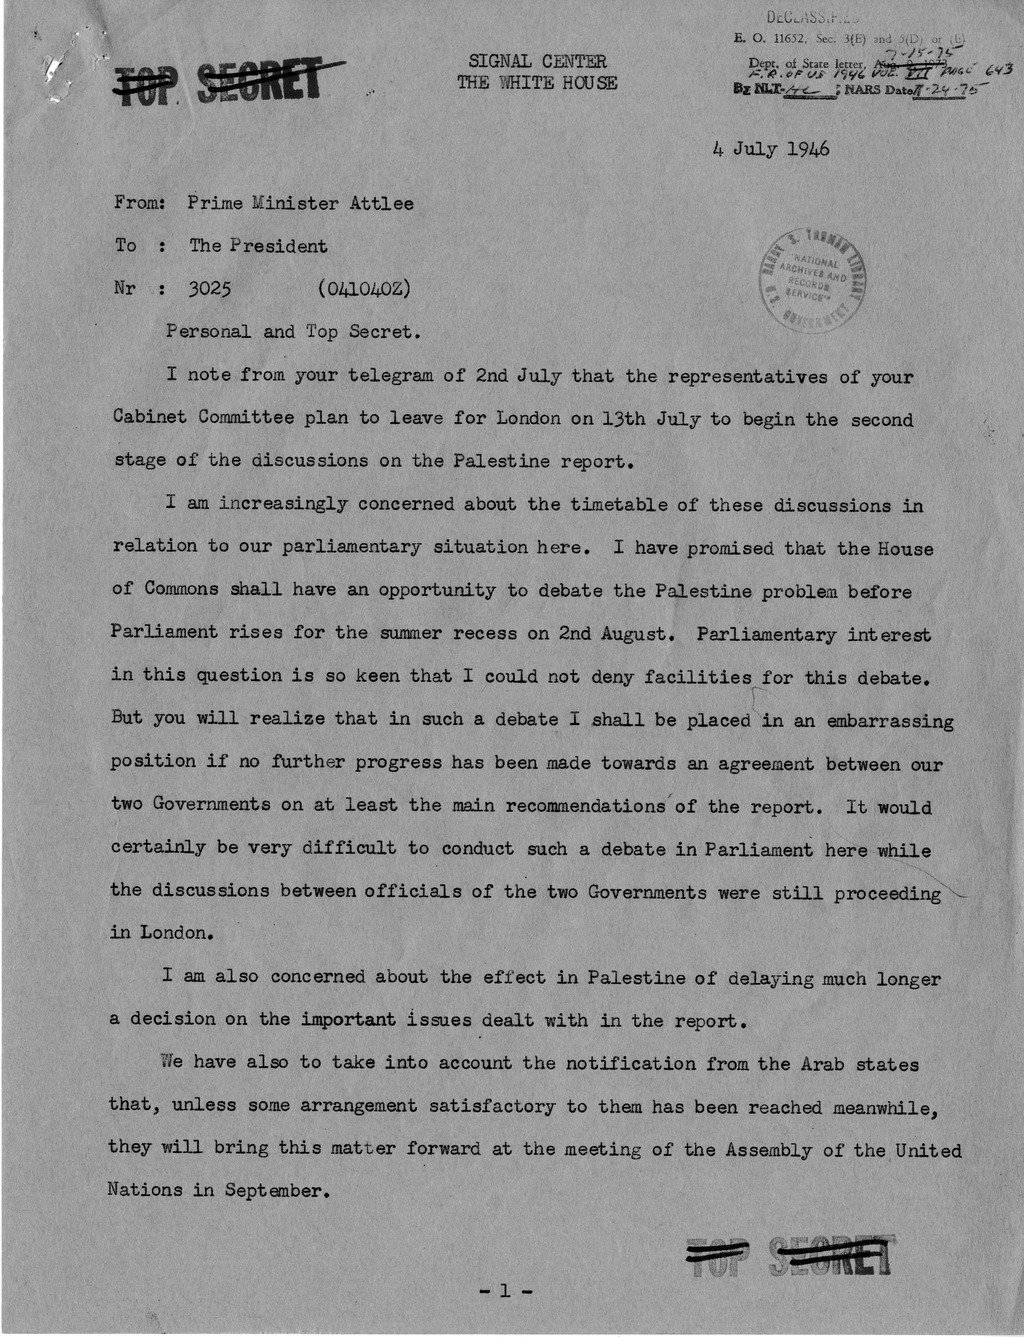 Memorandum from Prime Minister Clement Attlee to President Harry S. Truman with Attachment